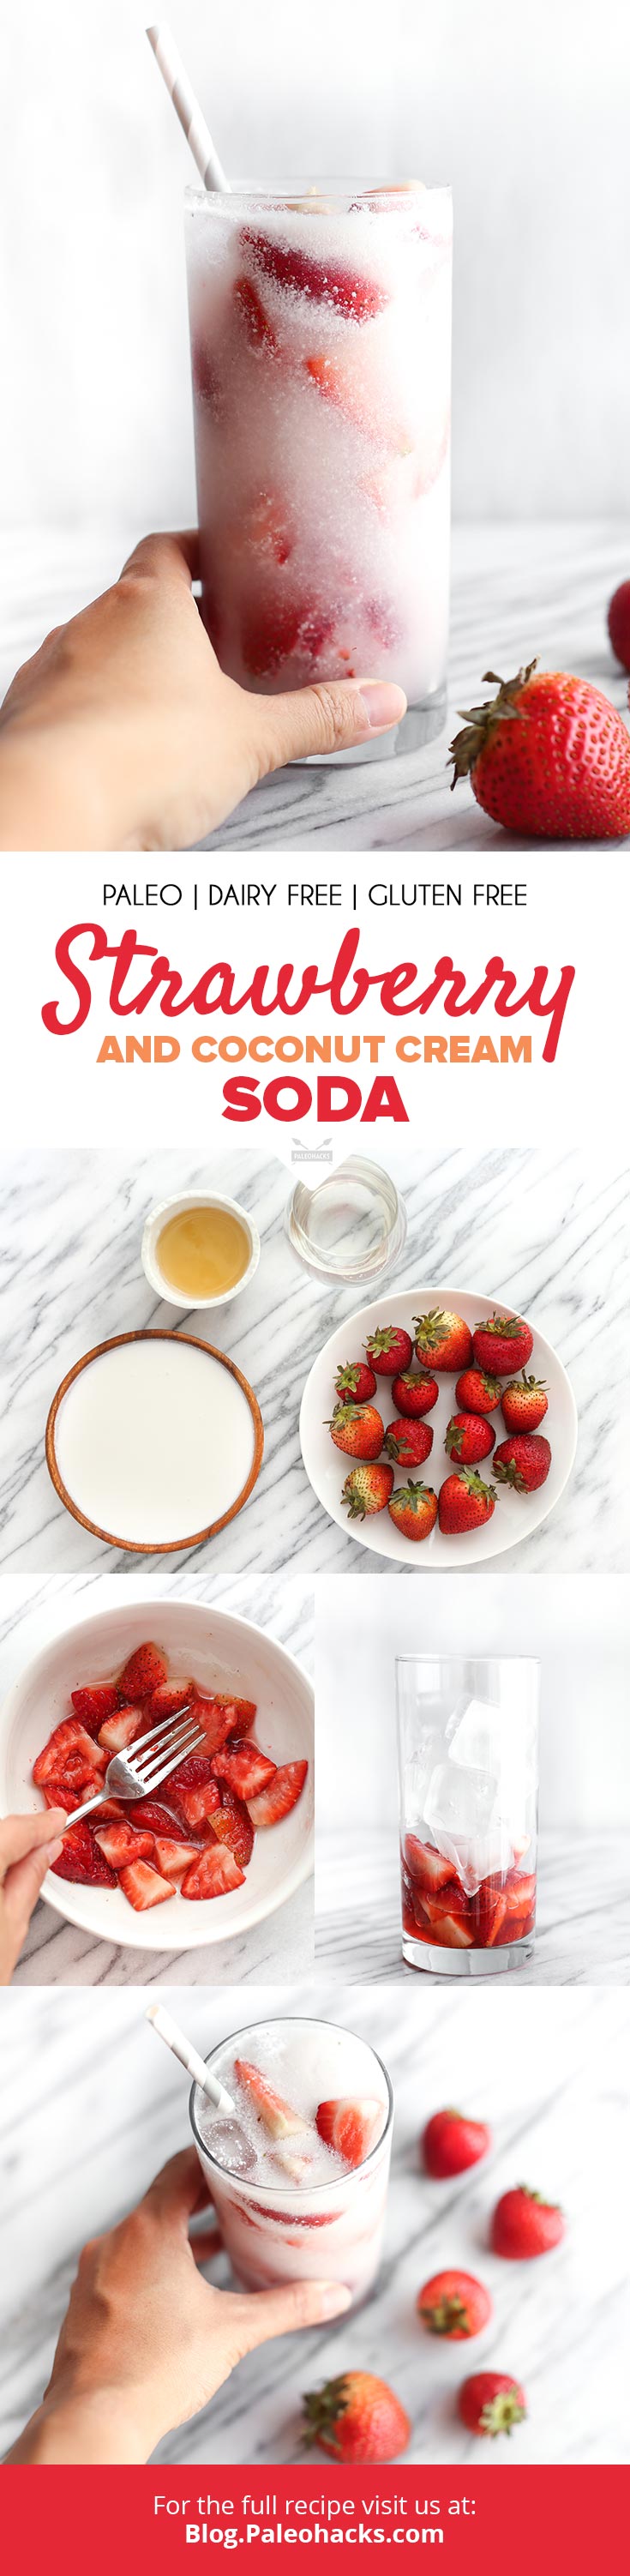 Nothing beats this fizzy Strawberry and Coconut Cream Soda you can enjoy anytime of the year. Hard to believe this baby is dairy-free!